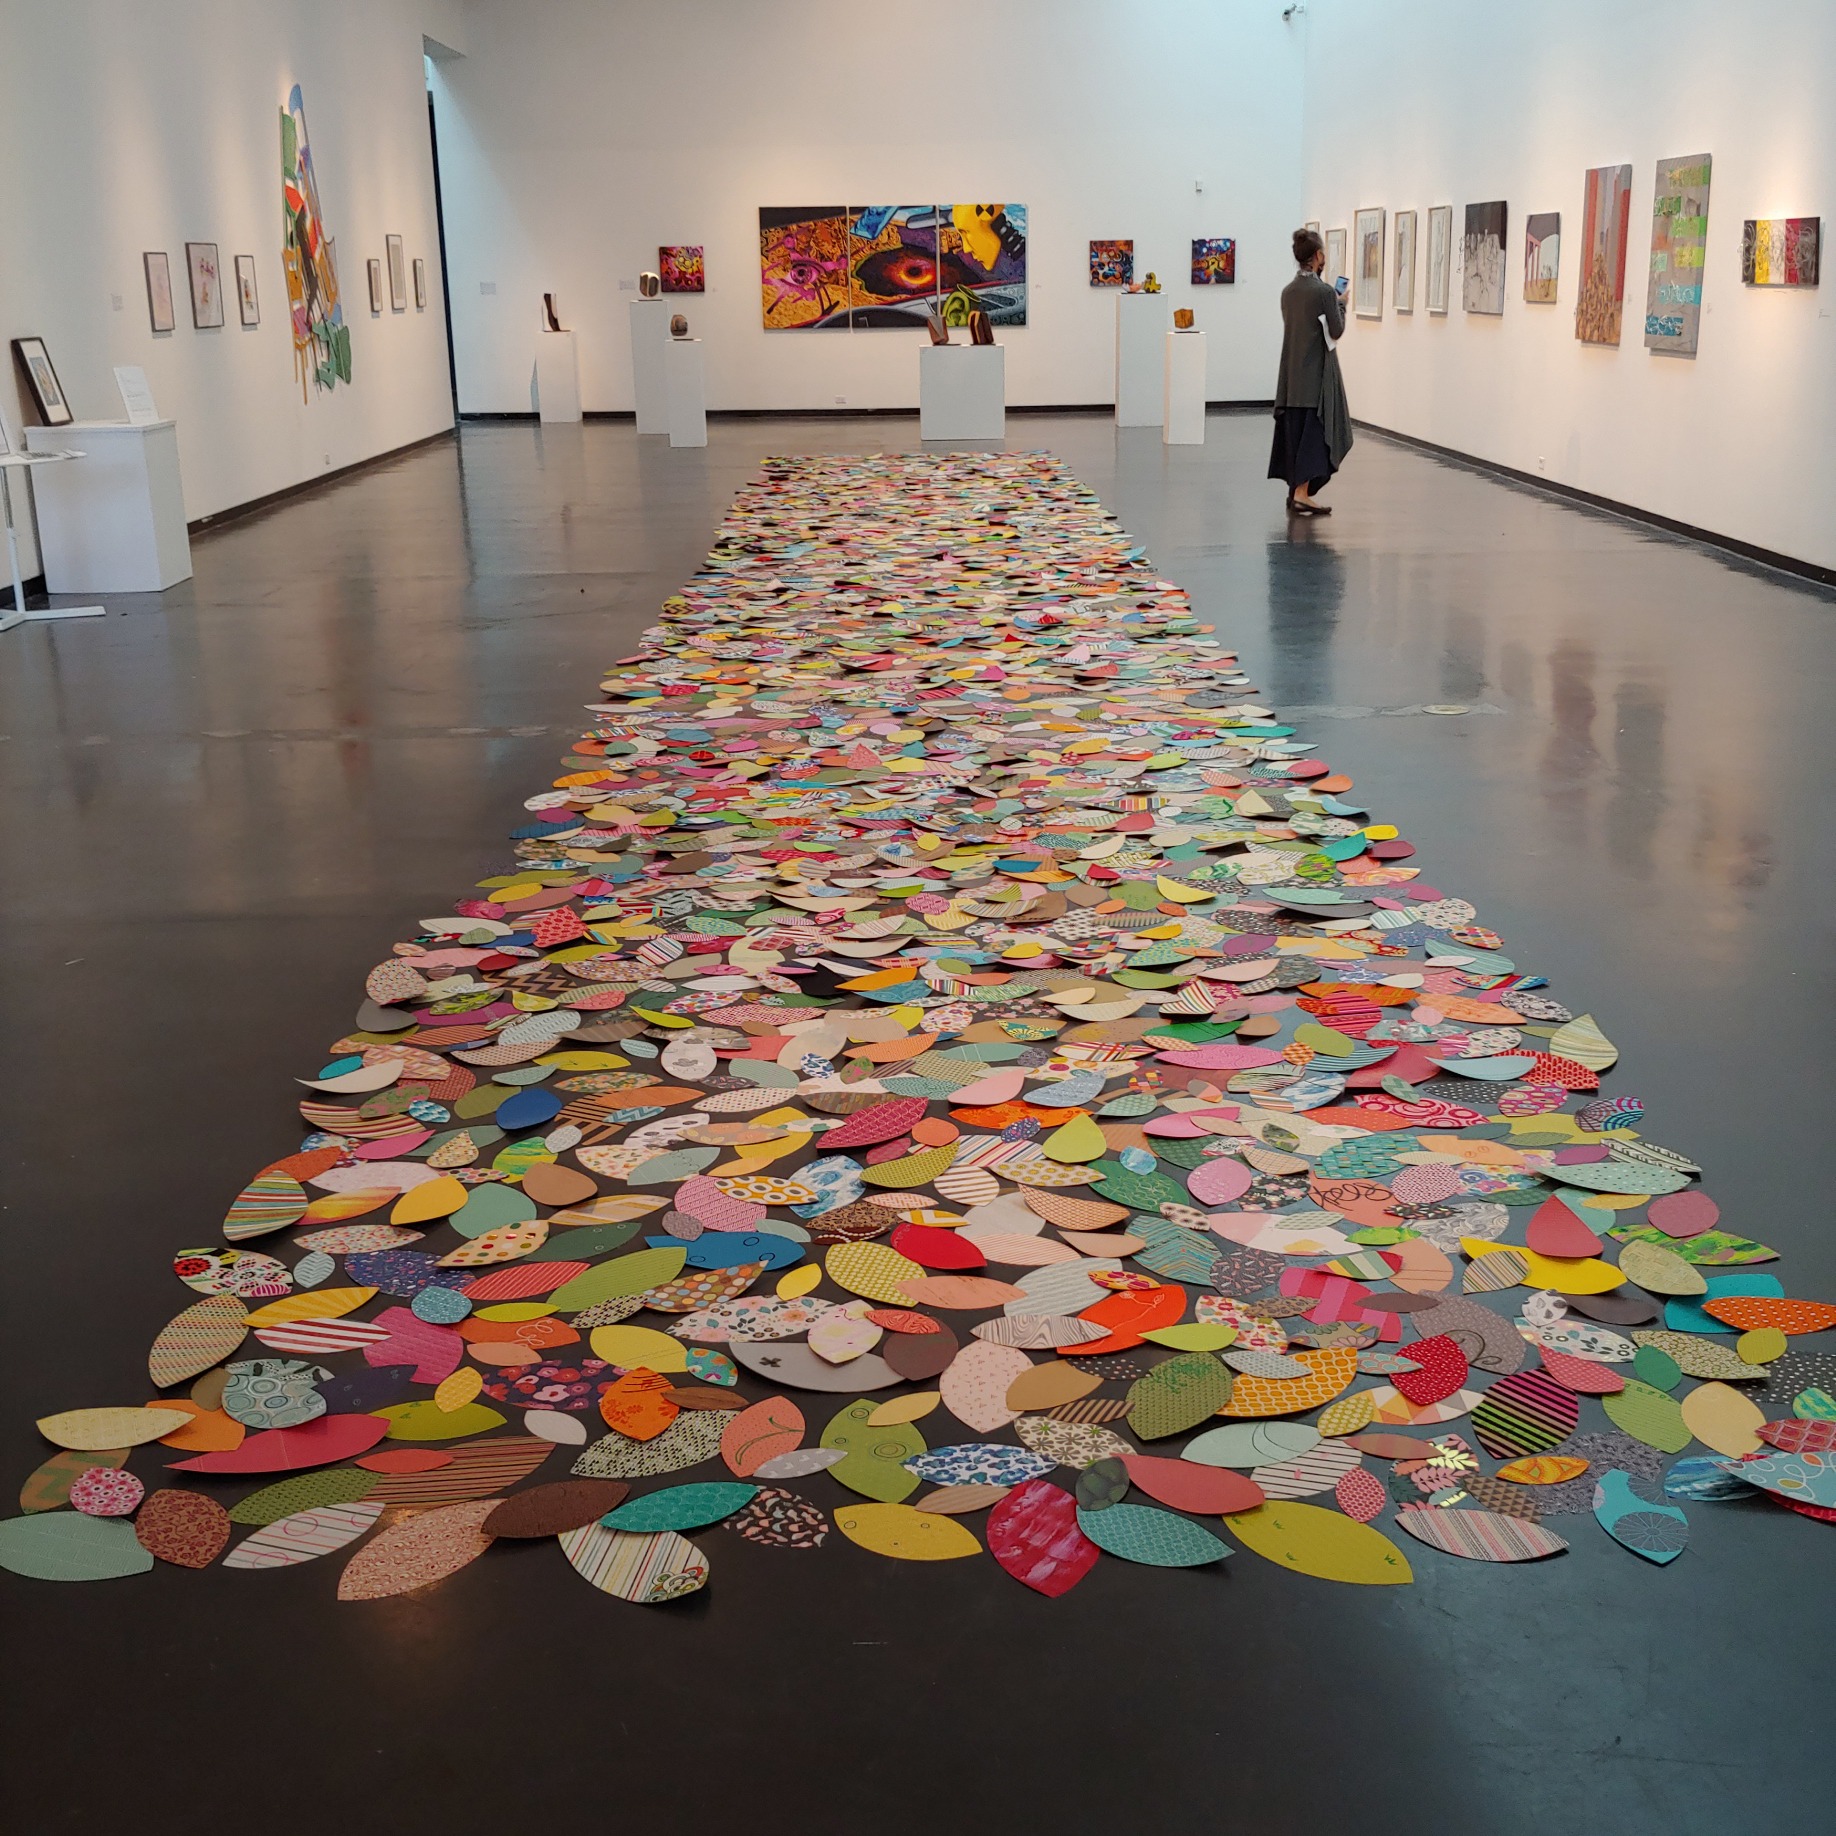 Steph Hargrove, “30 Minutes.” Dimensions: 8 ft x 54 ft. Fabric, paint, paper, collected chipboard waste.